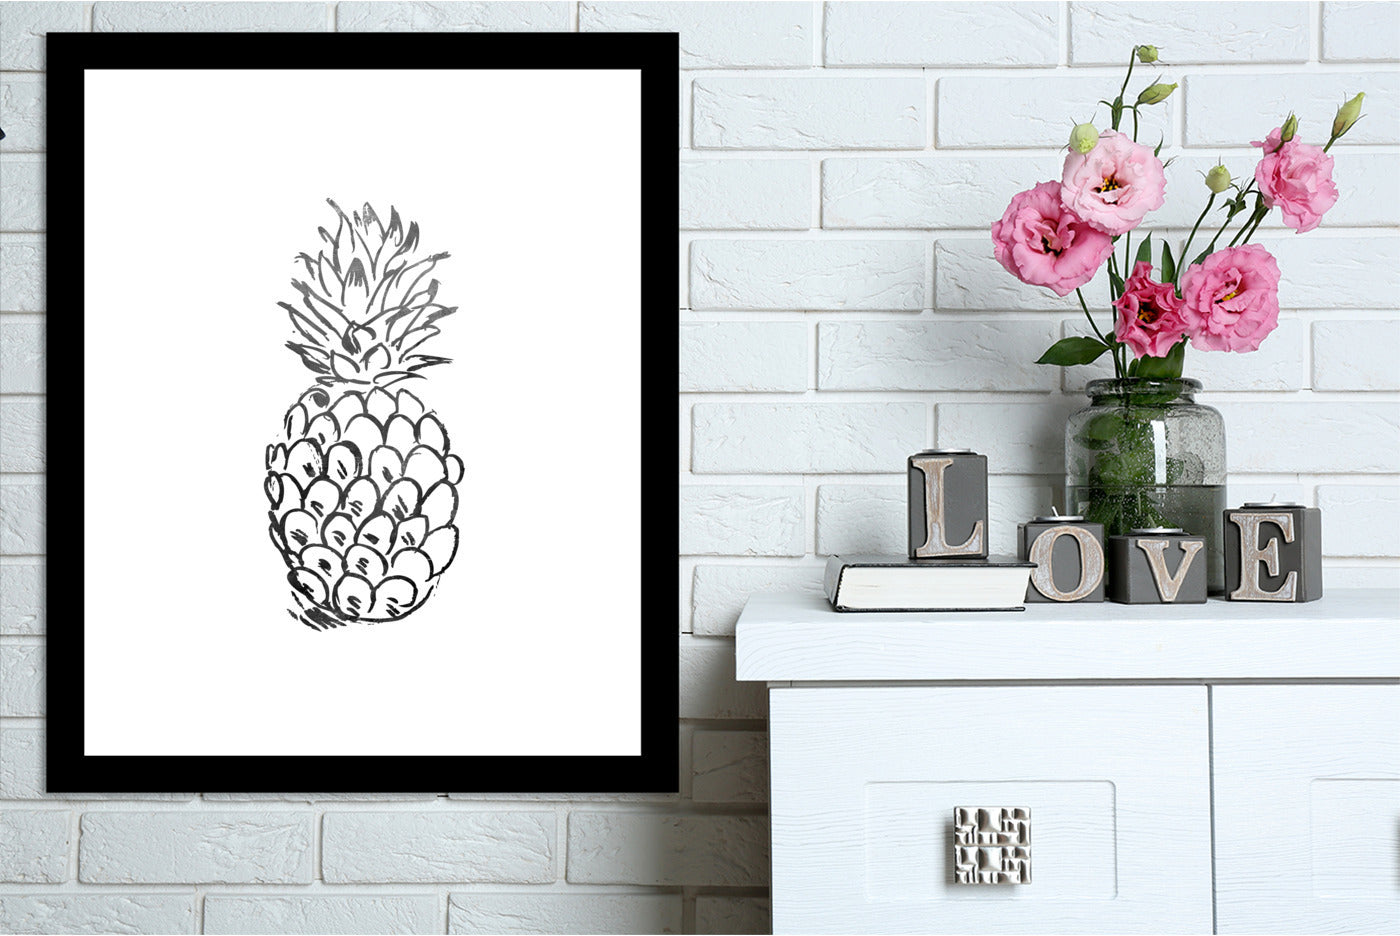 Faded Pineapple  by Jetty Printables Framed Print - Americanflat